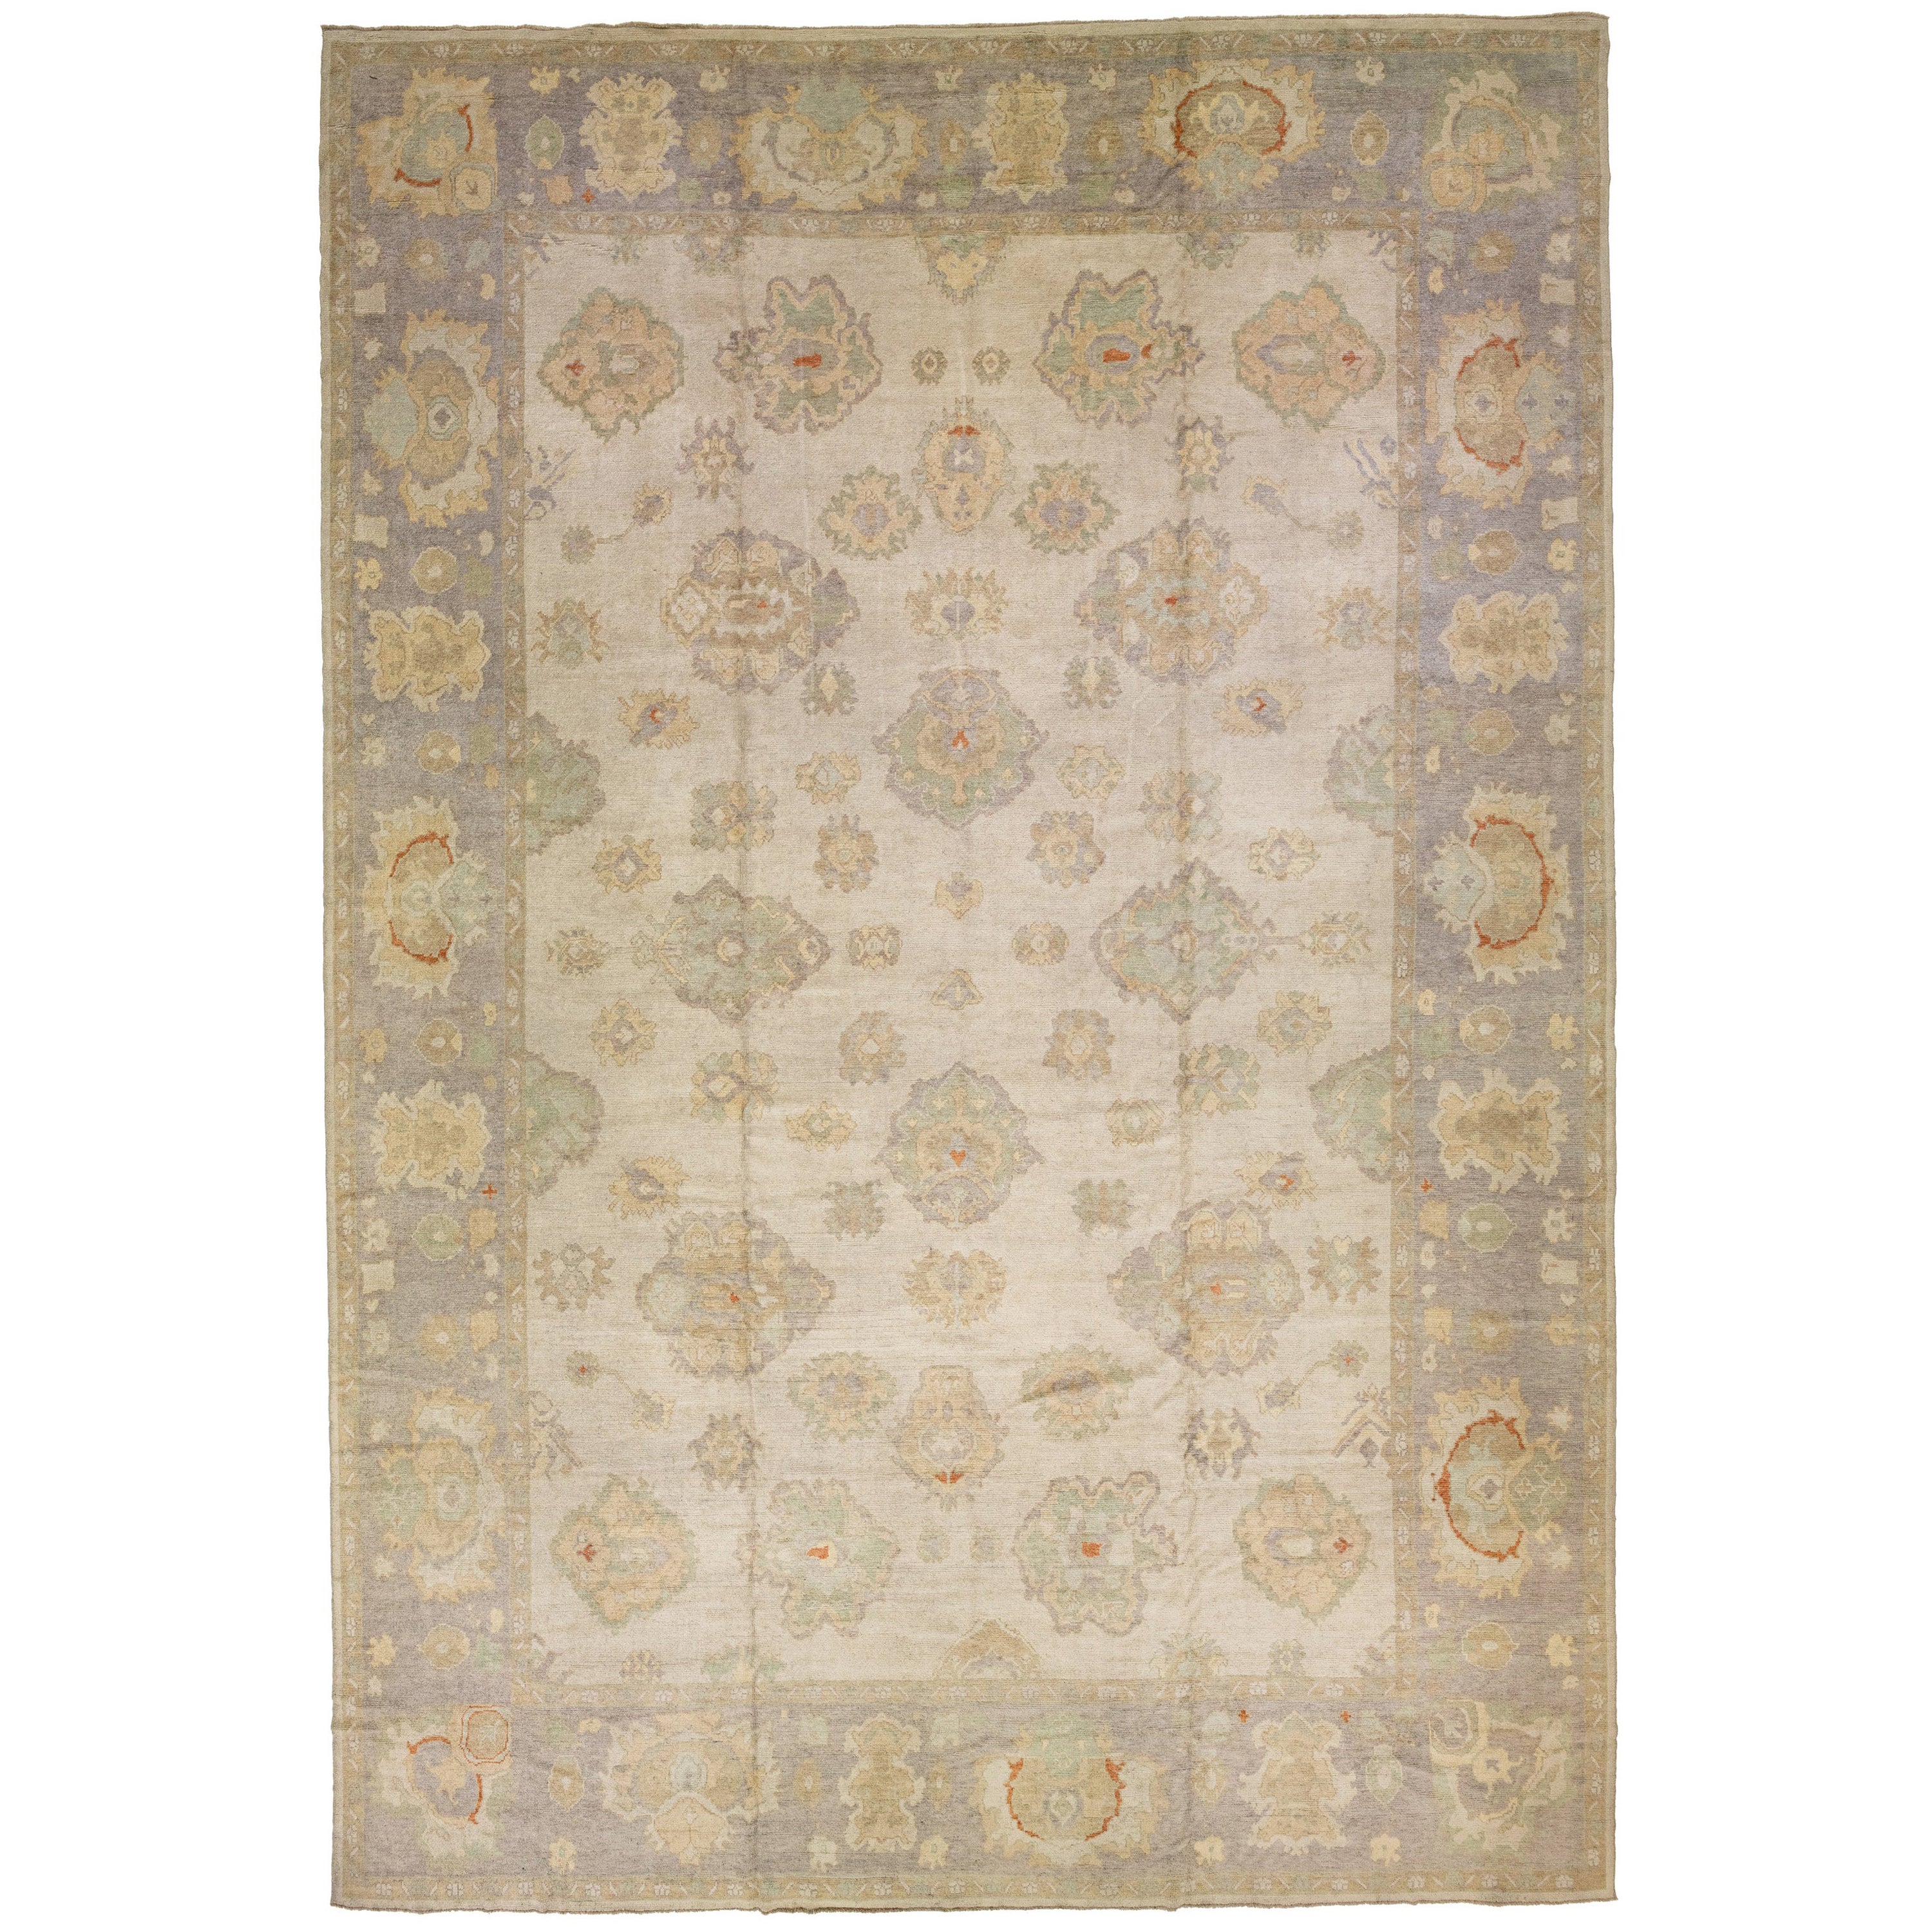 Oversize Handmade Contemporary Oushak Wool Rug In Beige with Floral Motif For Sale